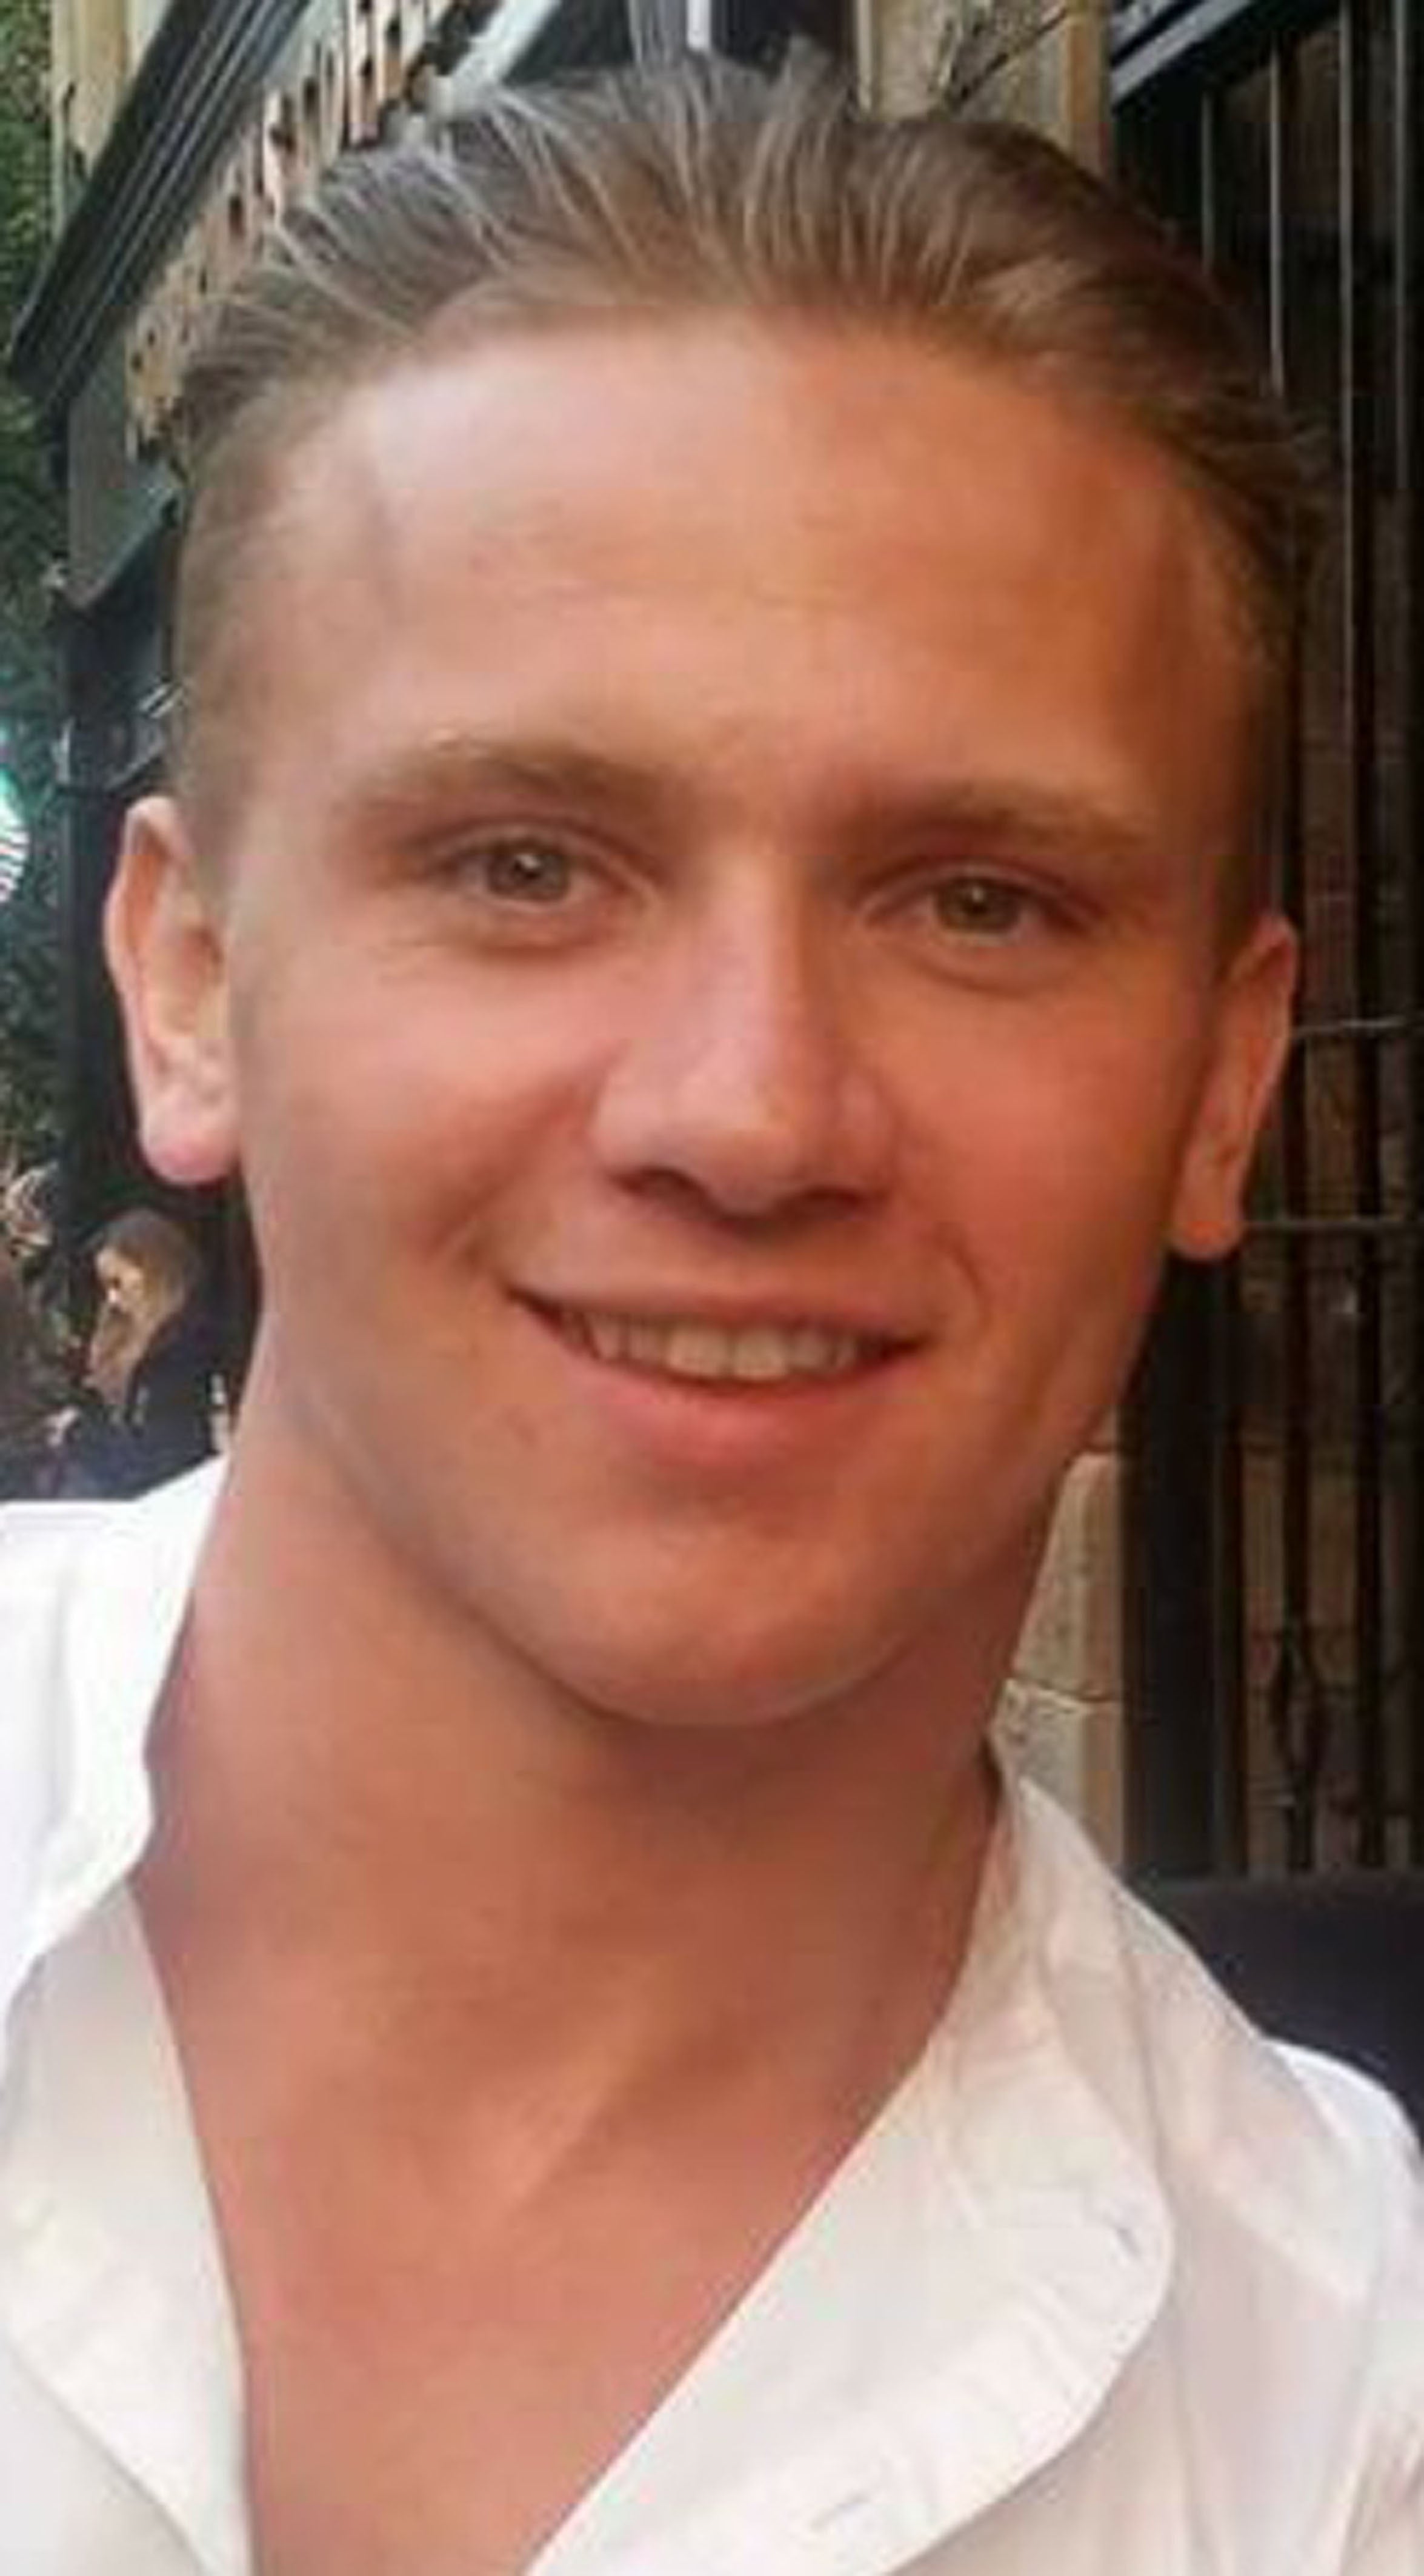 The mother of RAF gunner Corrie McKeague said it was always the “most obvious thing” that her son went into a bin that was tipped into a waste lorry, and that after an inquest she now believes it “100%” after her other questions about his disappearance were answered (PA)